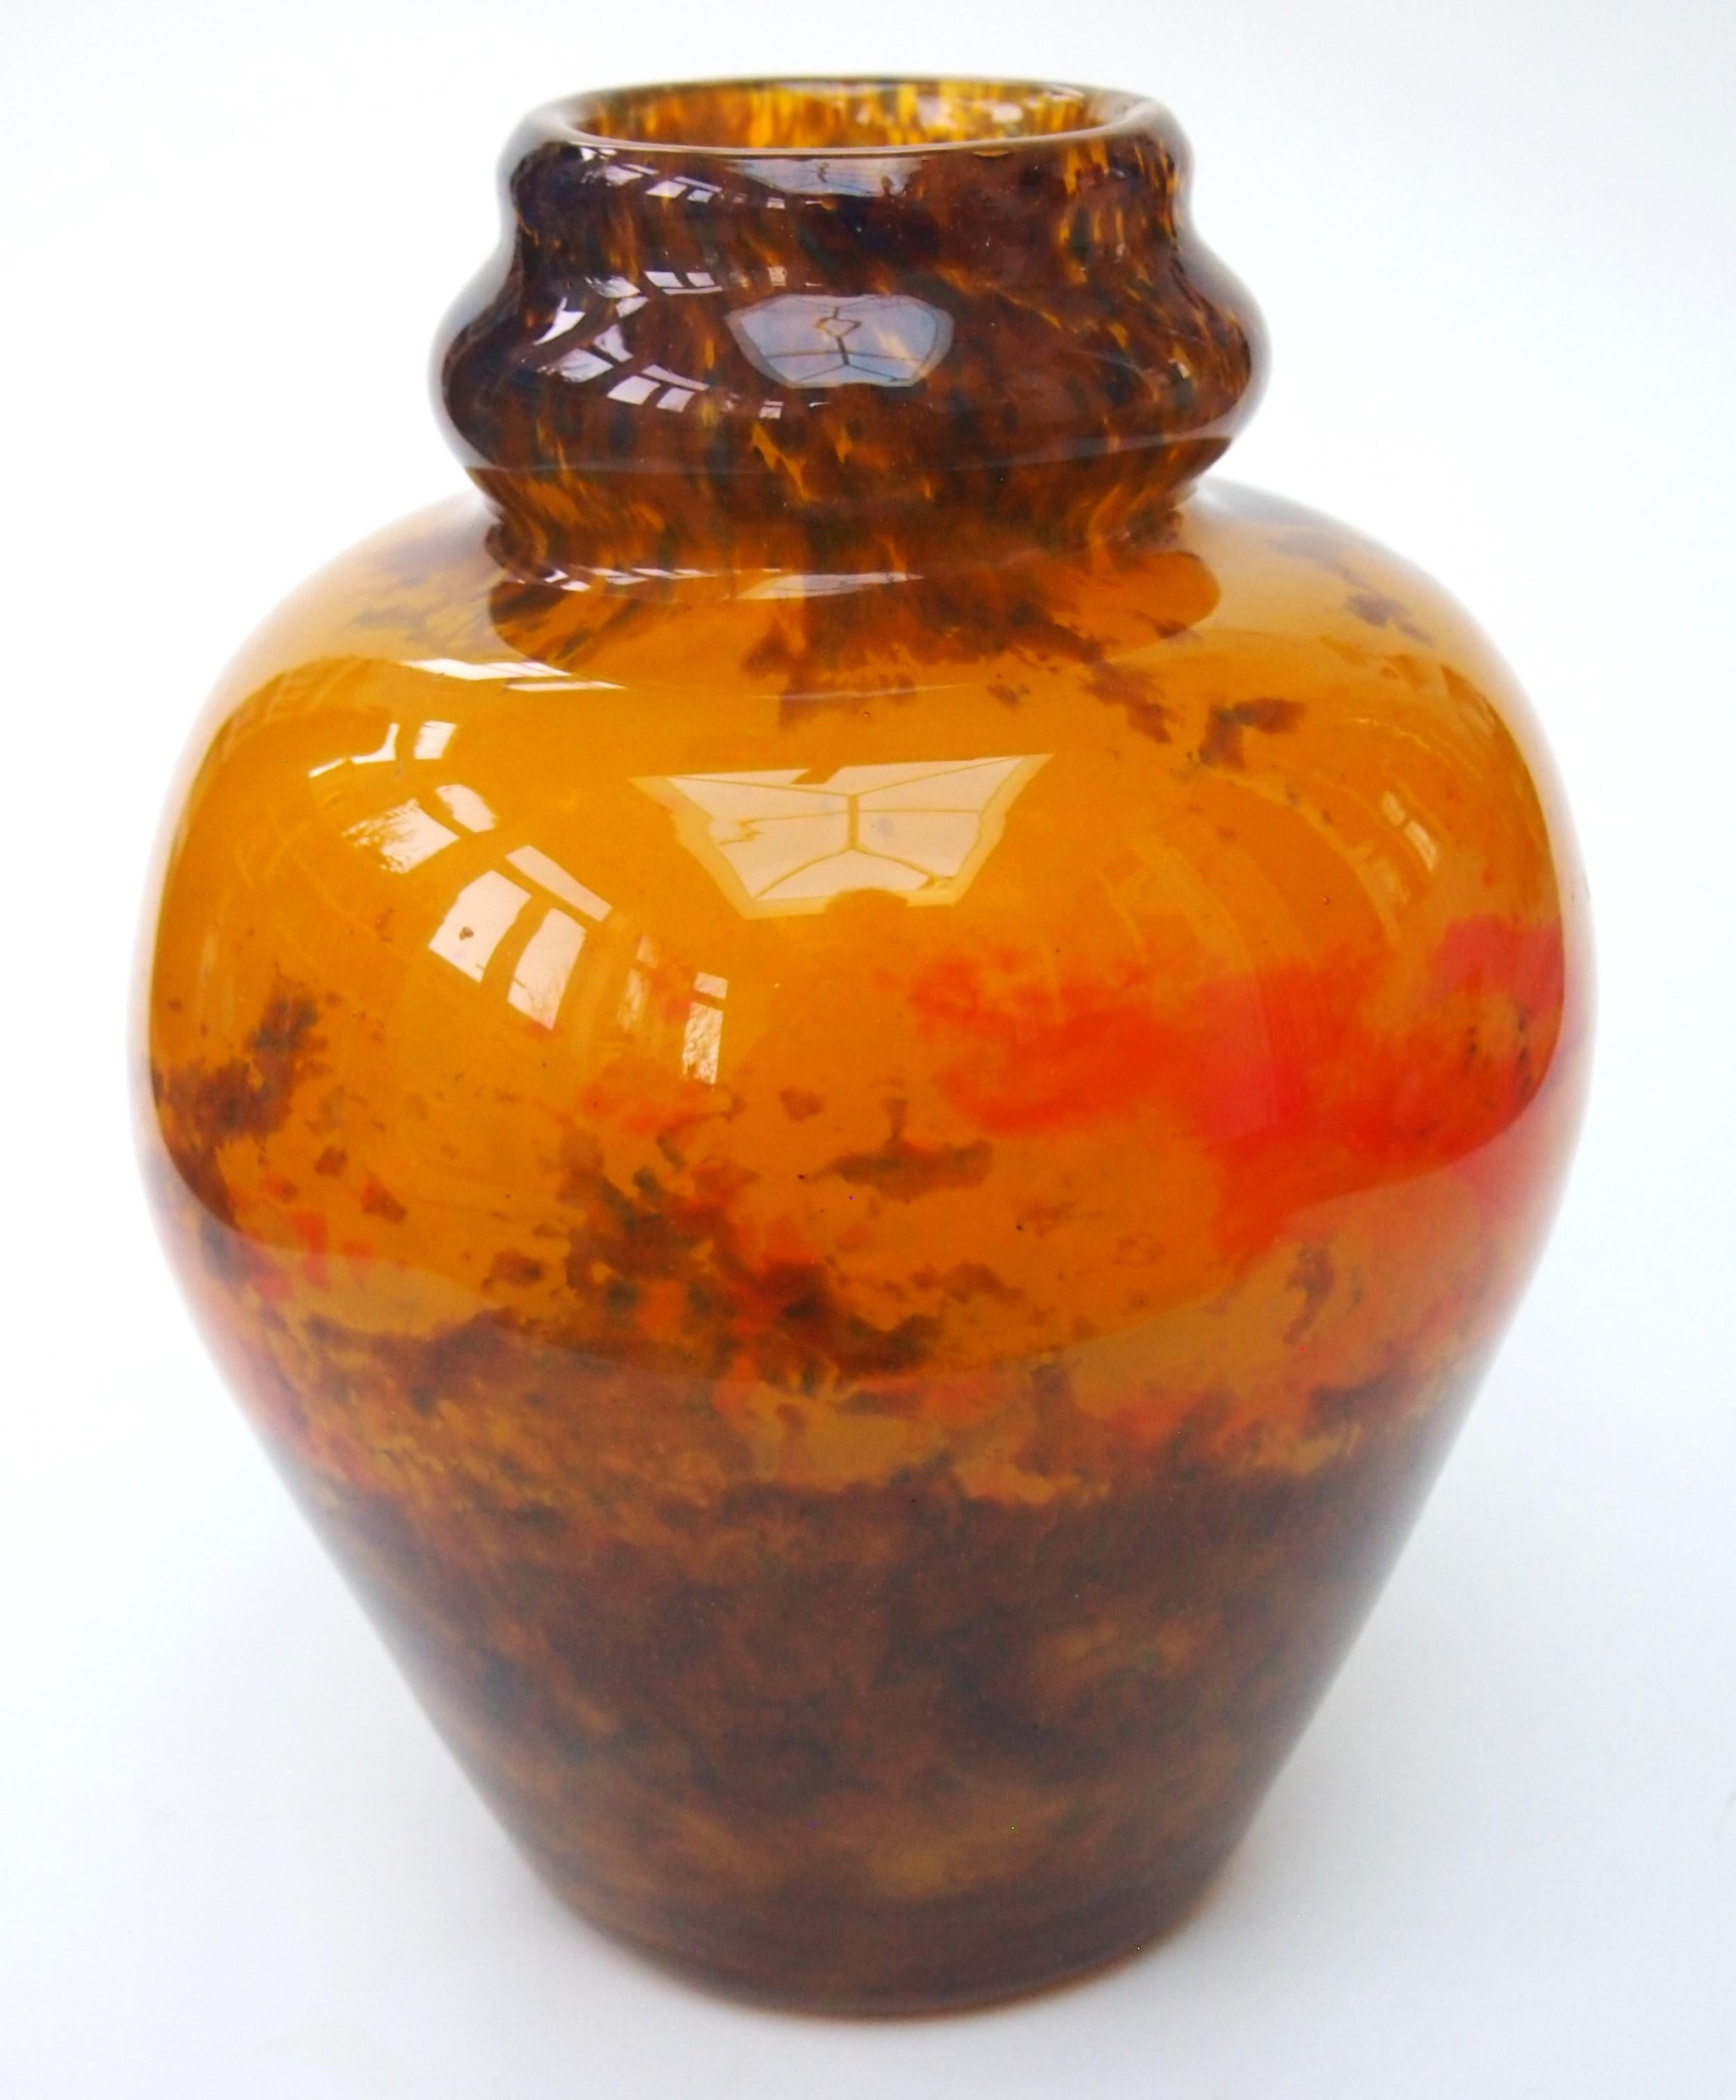 Striking and very beautiful Muller Freres large polychrome 'Jades' vase -highly fire polished and with random patches of yellow, red and brown. The vase is a simplified double gourd shape. It is fully signed 'Muller Frères Luneville' to the base see